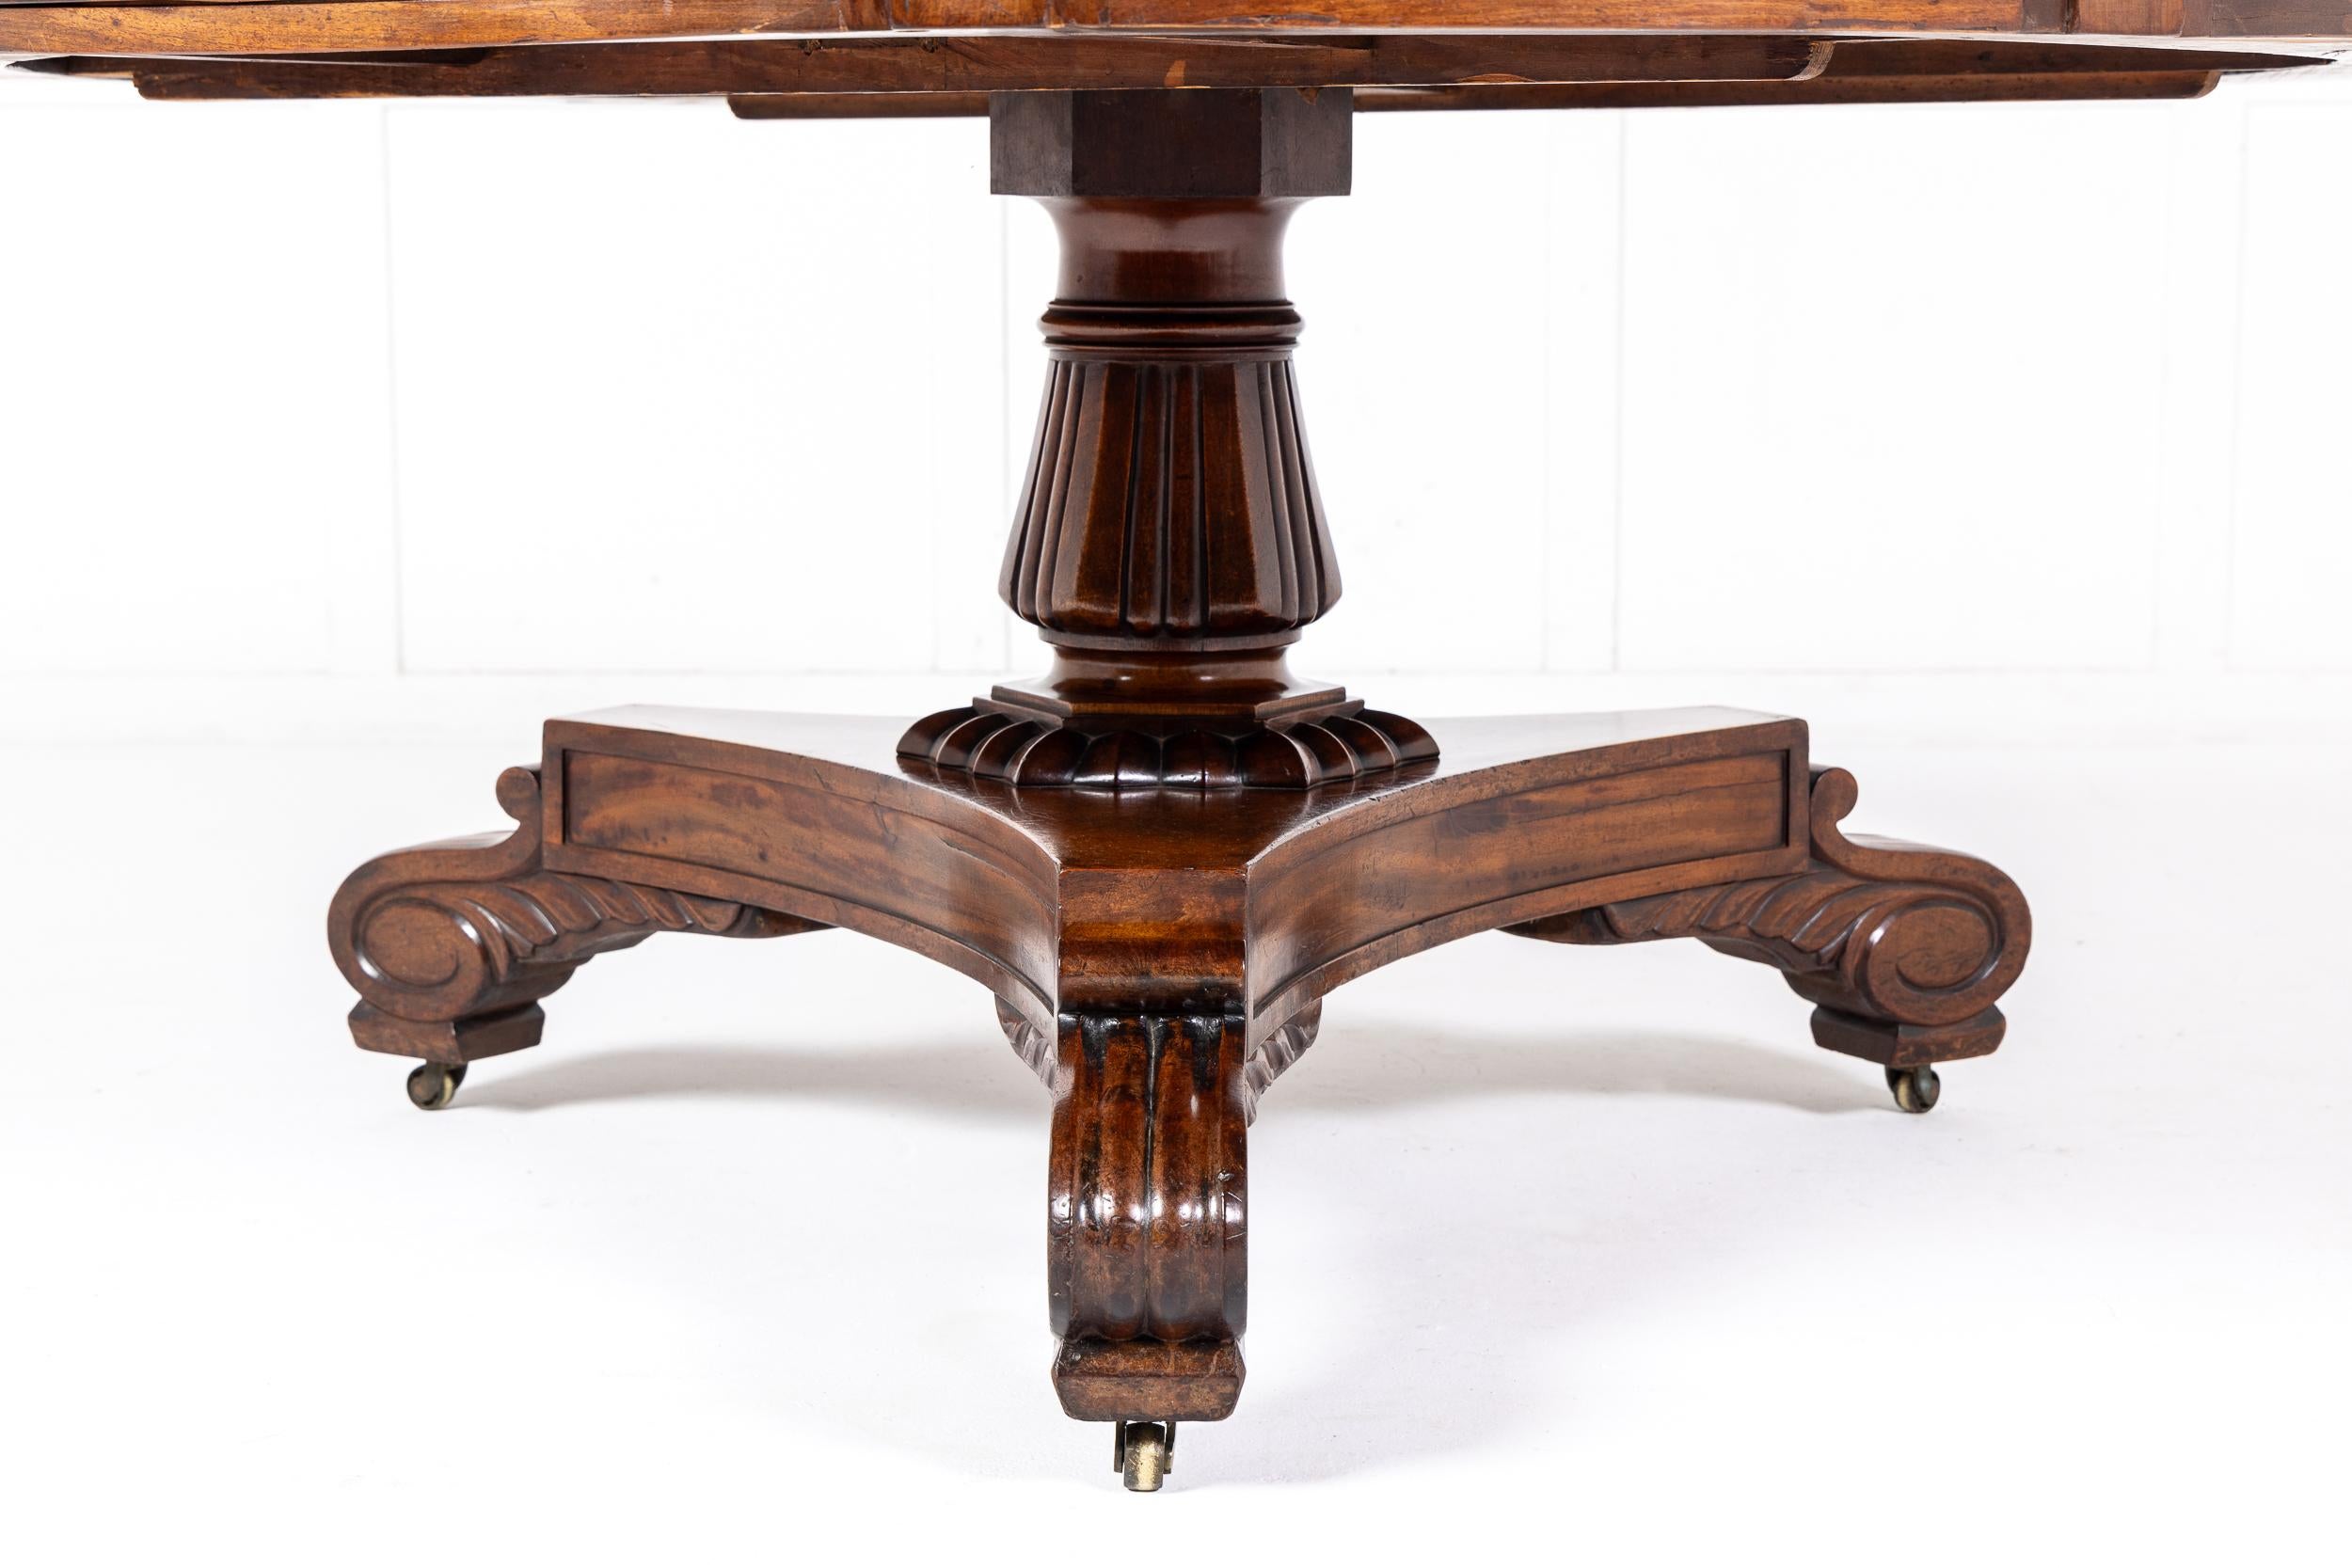 A Finely Proportioned Late Regency or William IV Mahogany Drum, Centre or Library Table c. 1830 with Exceptional Fiddle Back Top.

Based on designs for library tables drawn up by the early regency pioneers such as George Smith, this table shares the